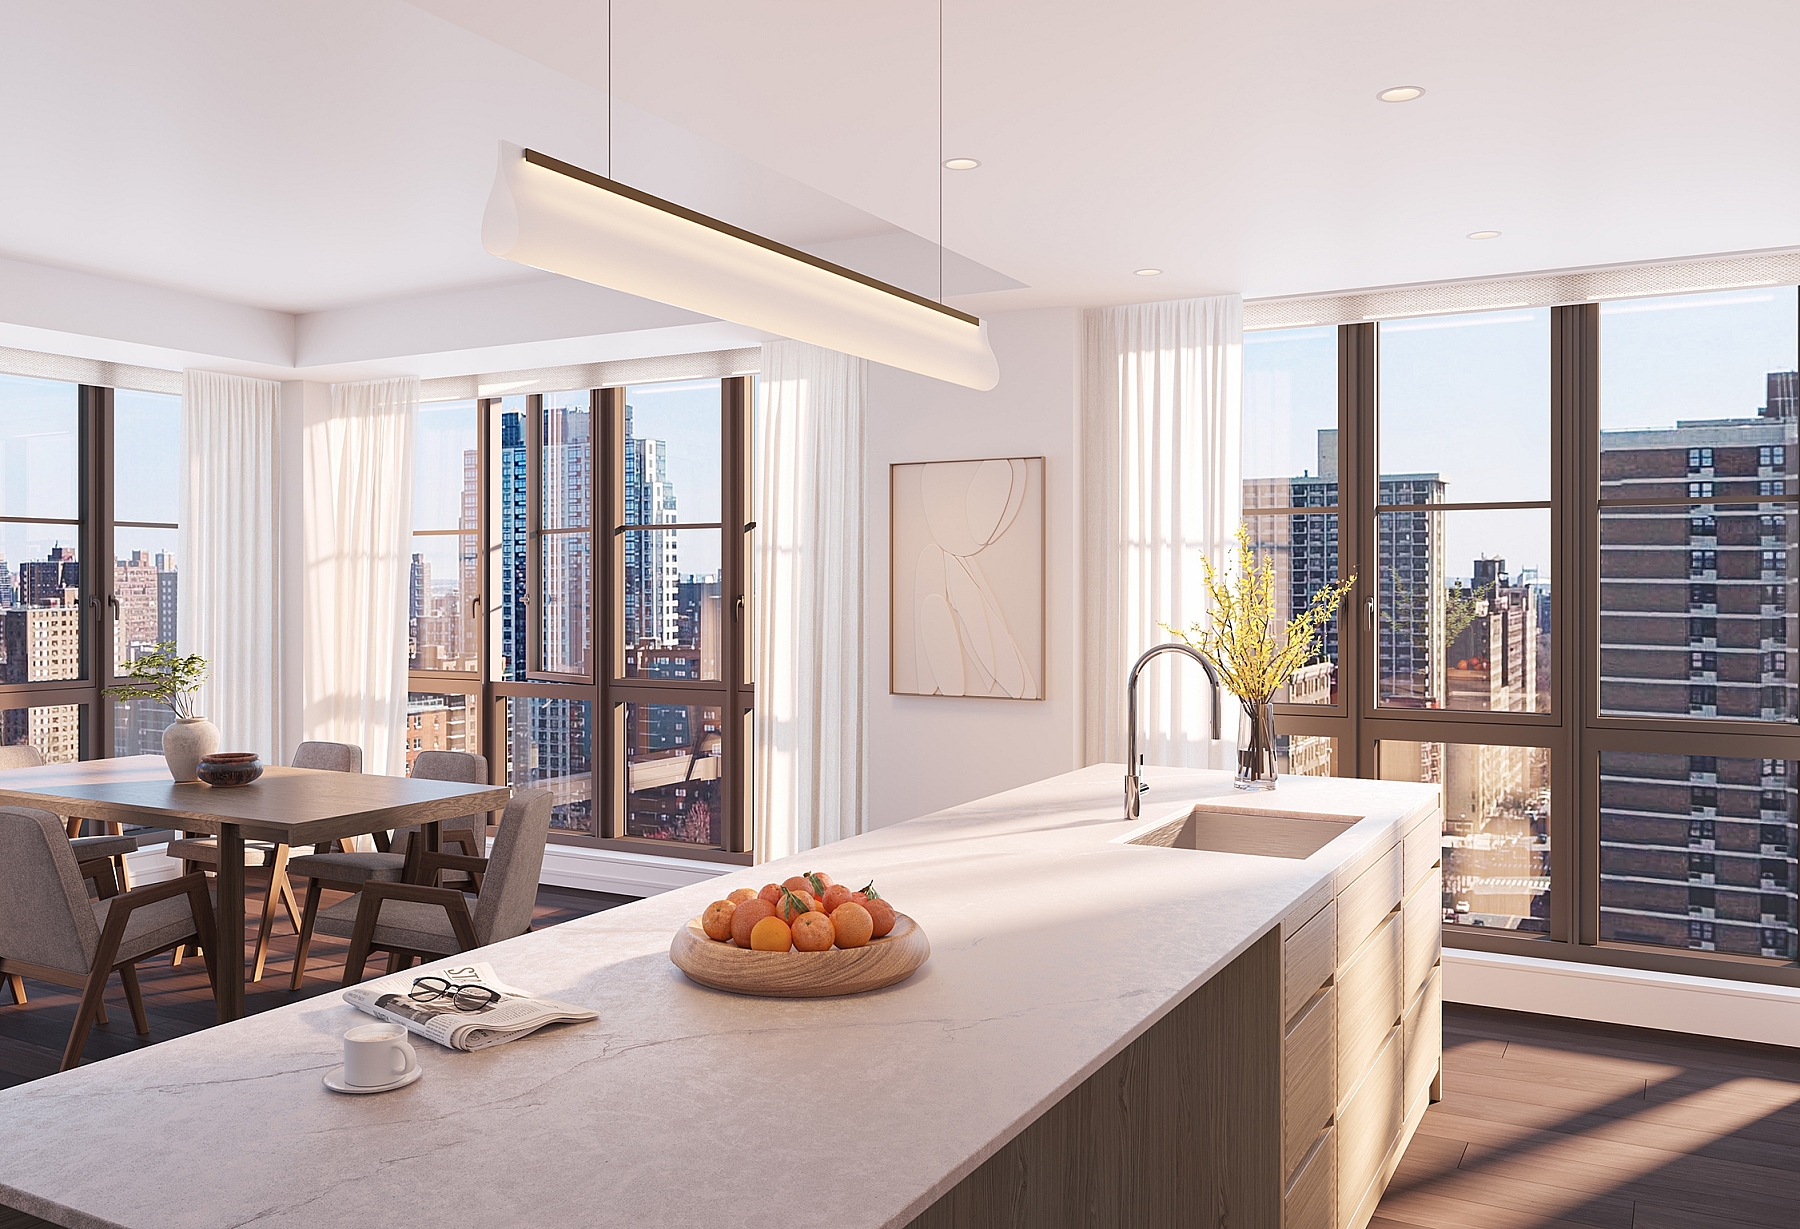 The urban allure of 96+Broadway on the Upper West Side